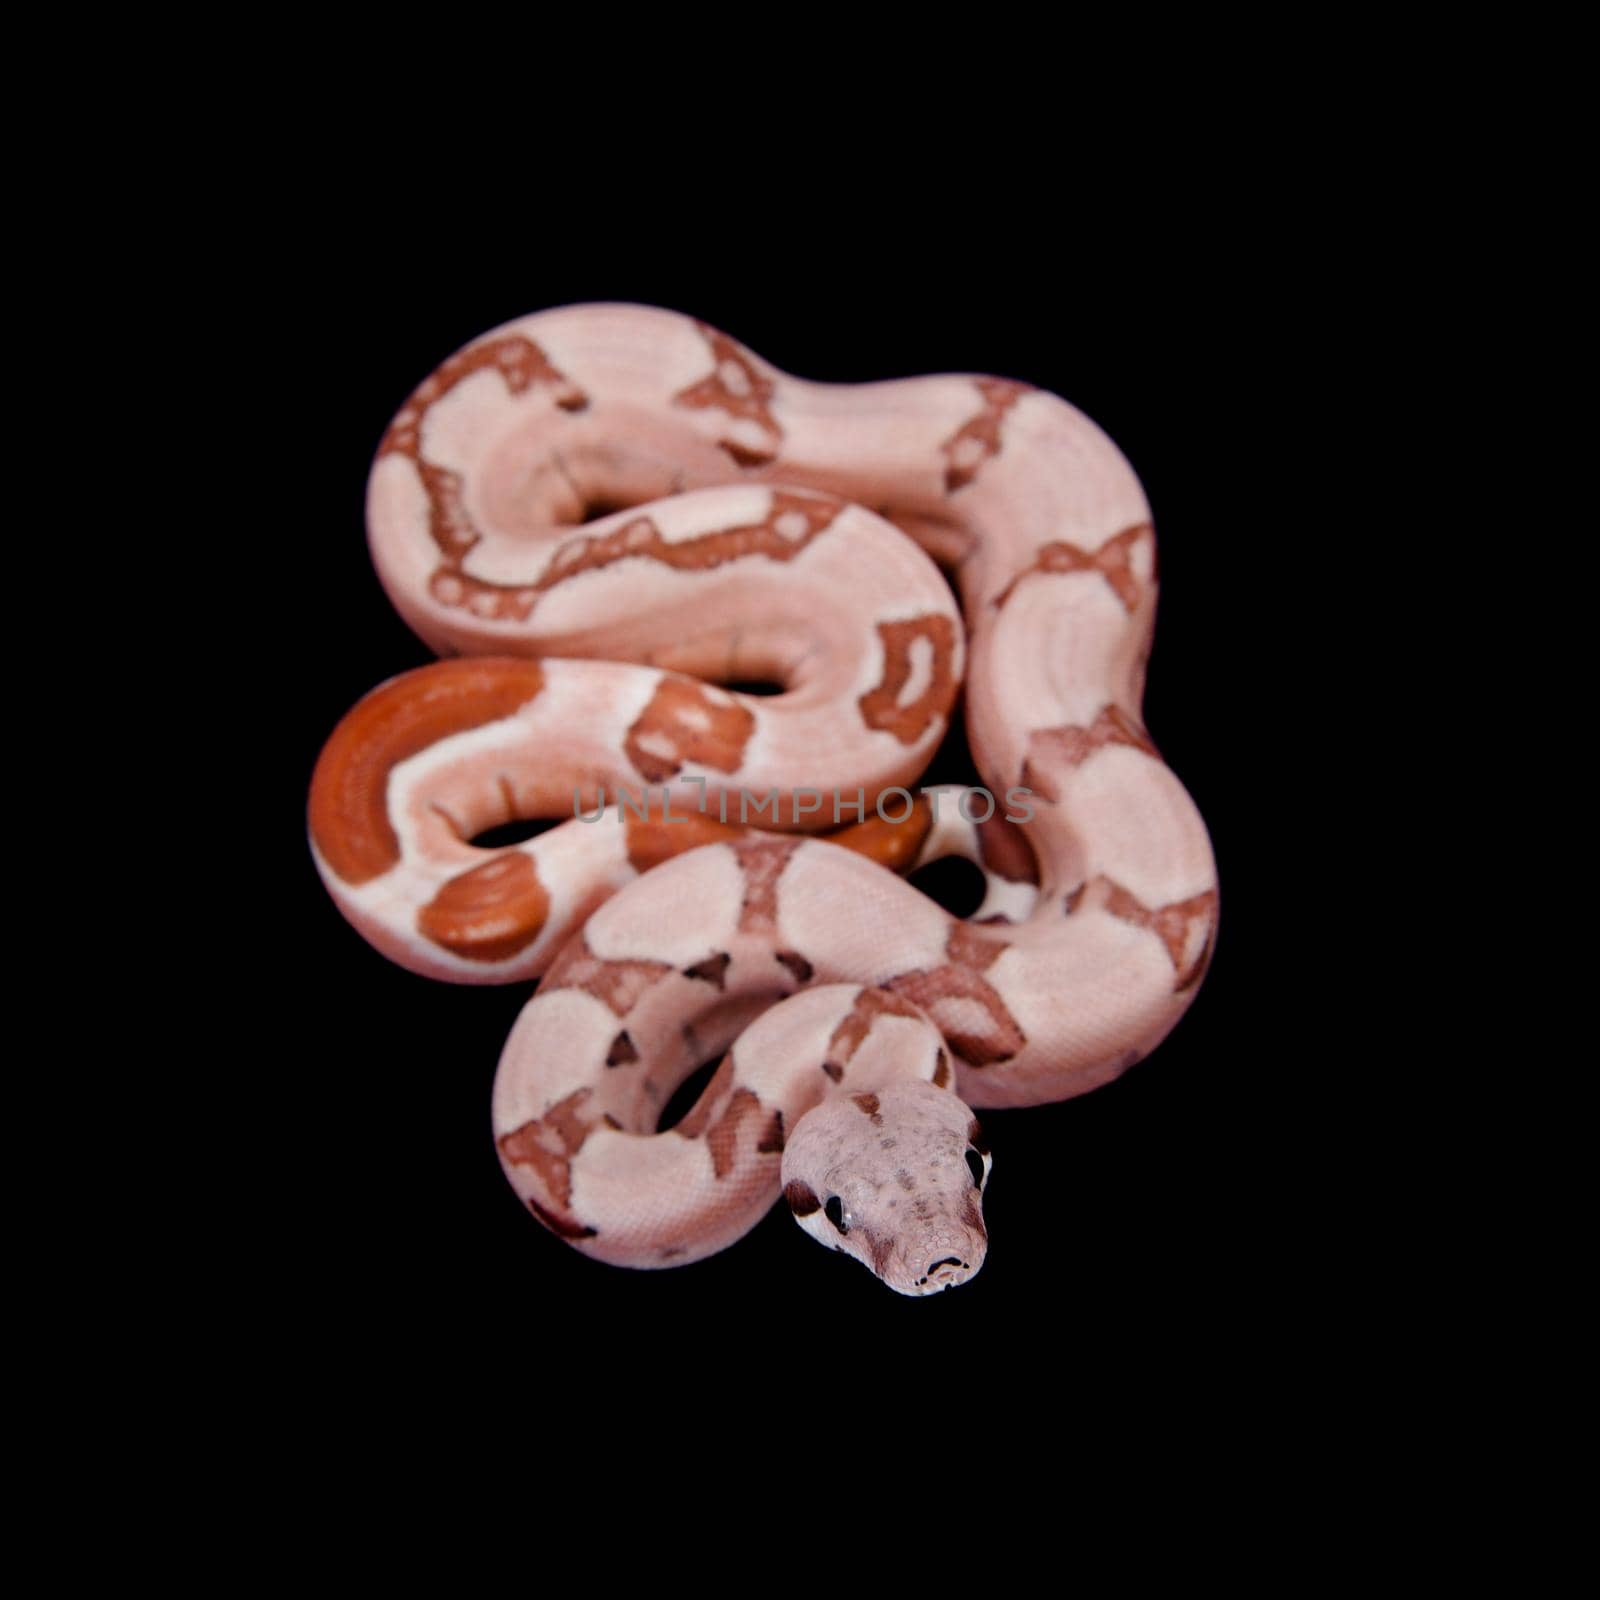 The common boa, Boa constrictor, isolated on black background